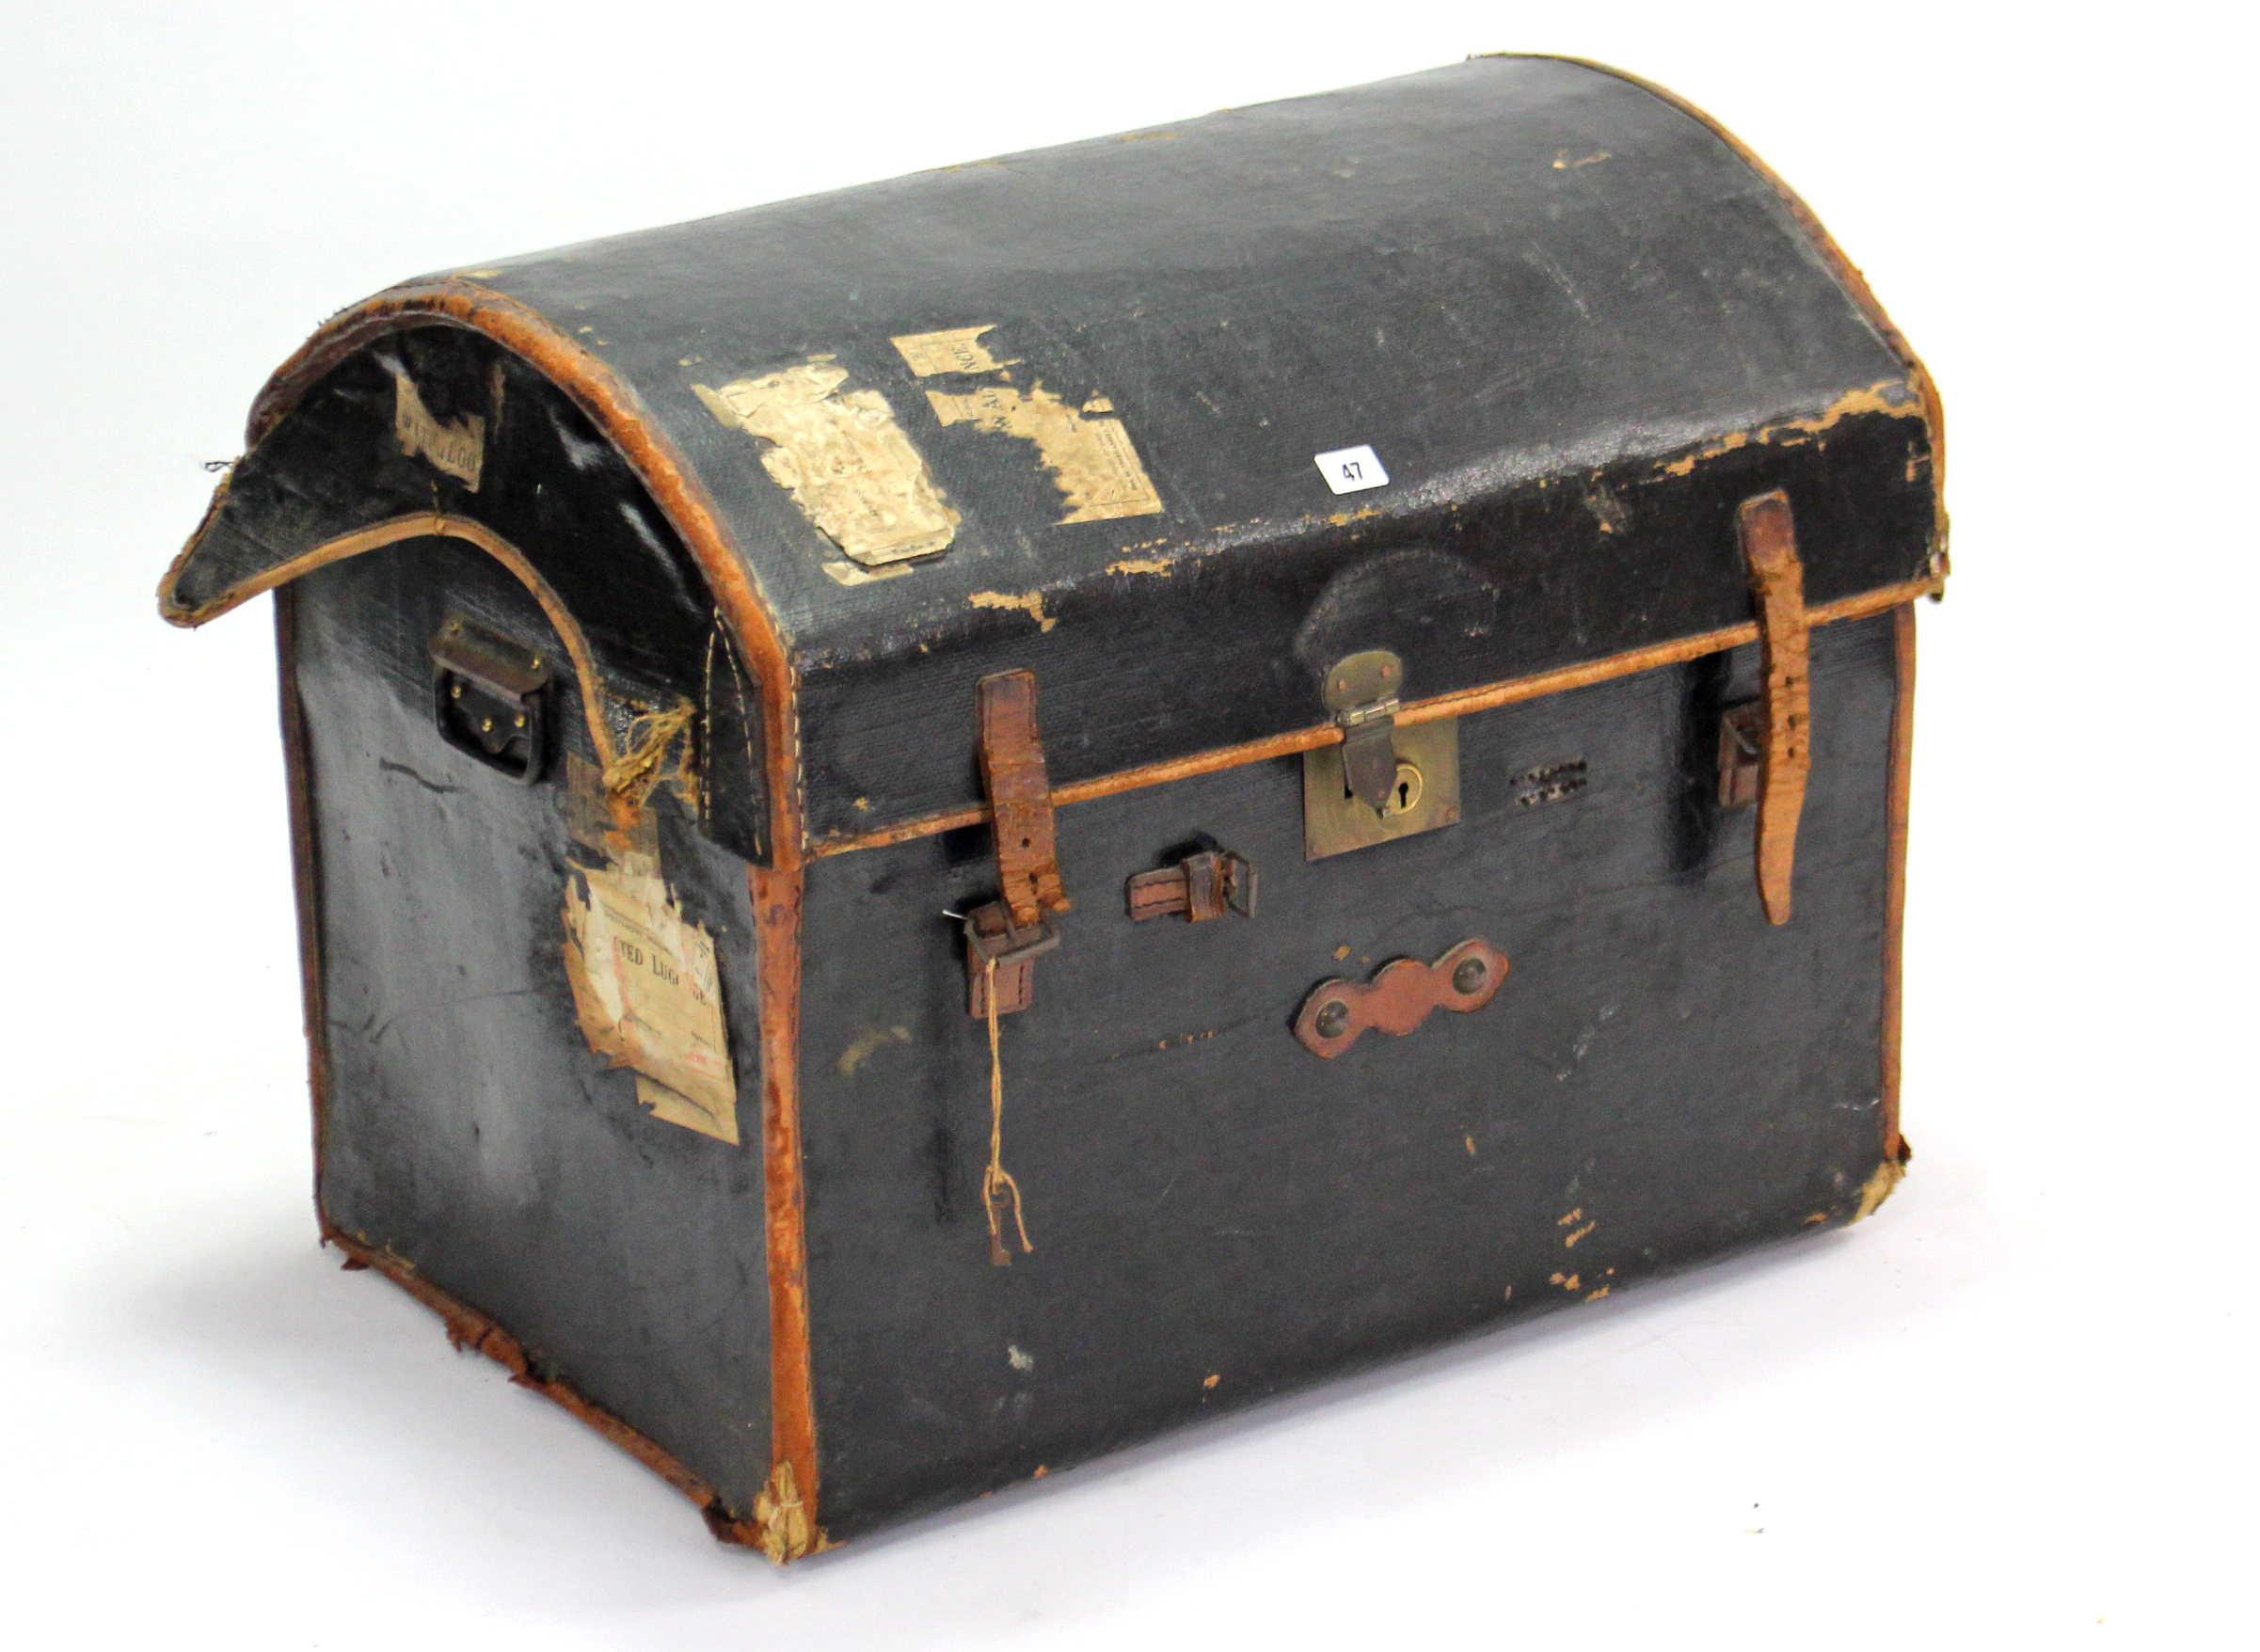 A late 19th/early 20th century black fibre-covered & leather-bound domed-top travelling trunk with